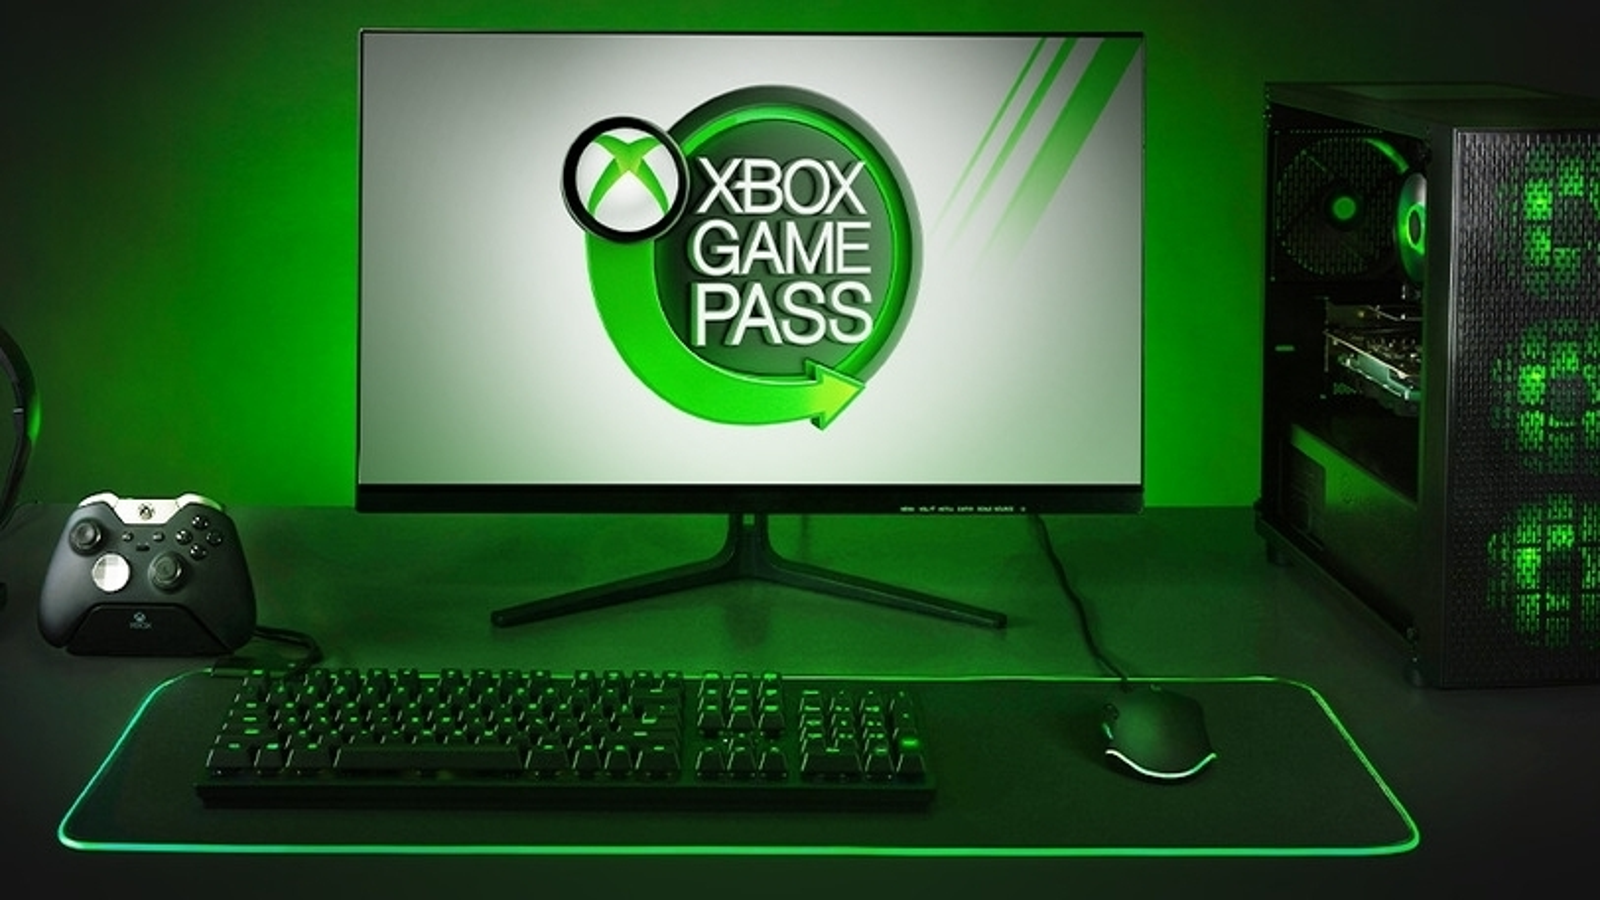 Microsoft has removed the 'Xbox' from PC Game Pass